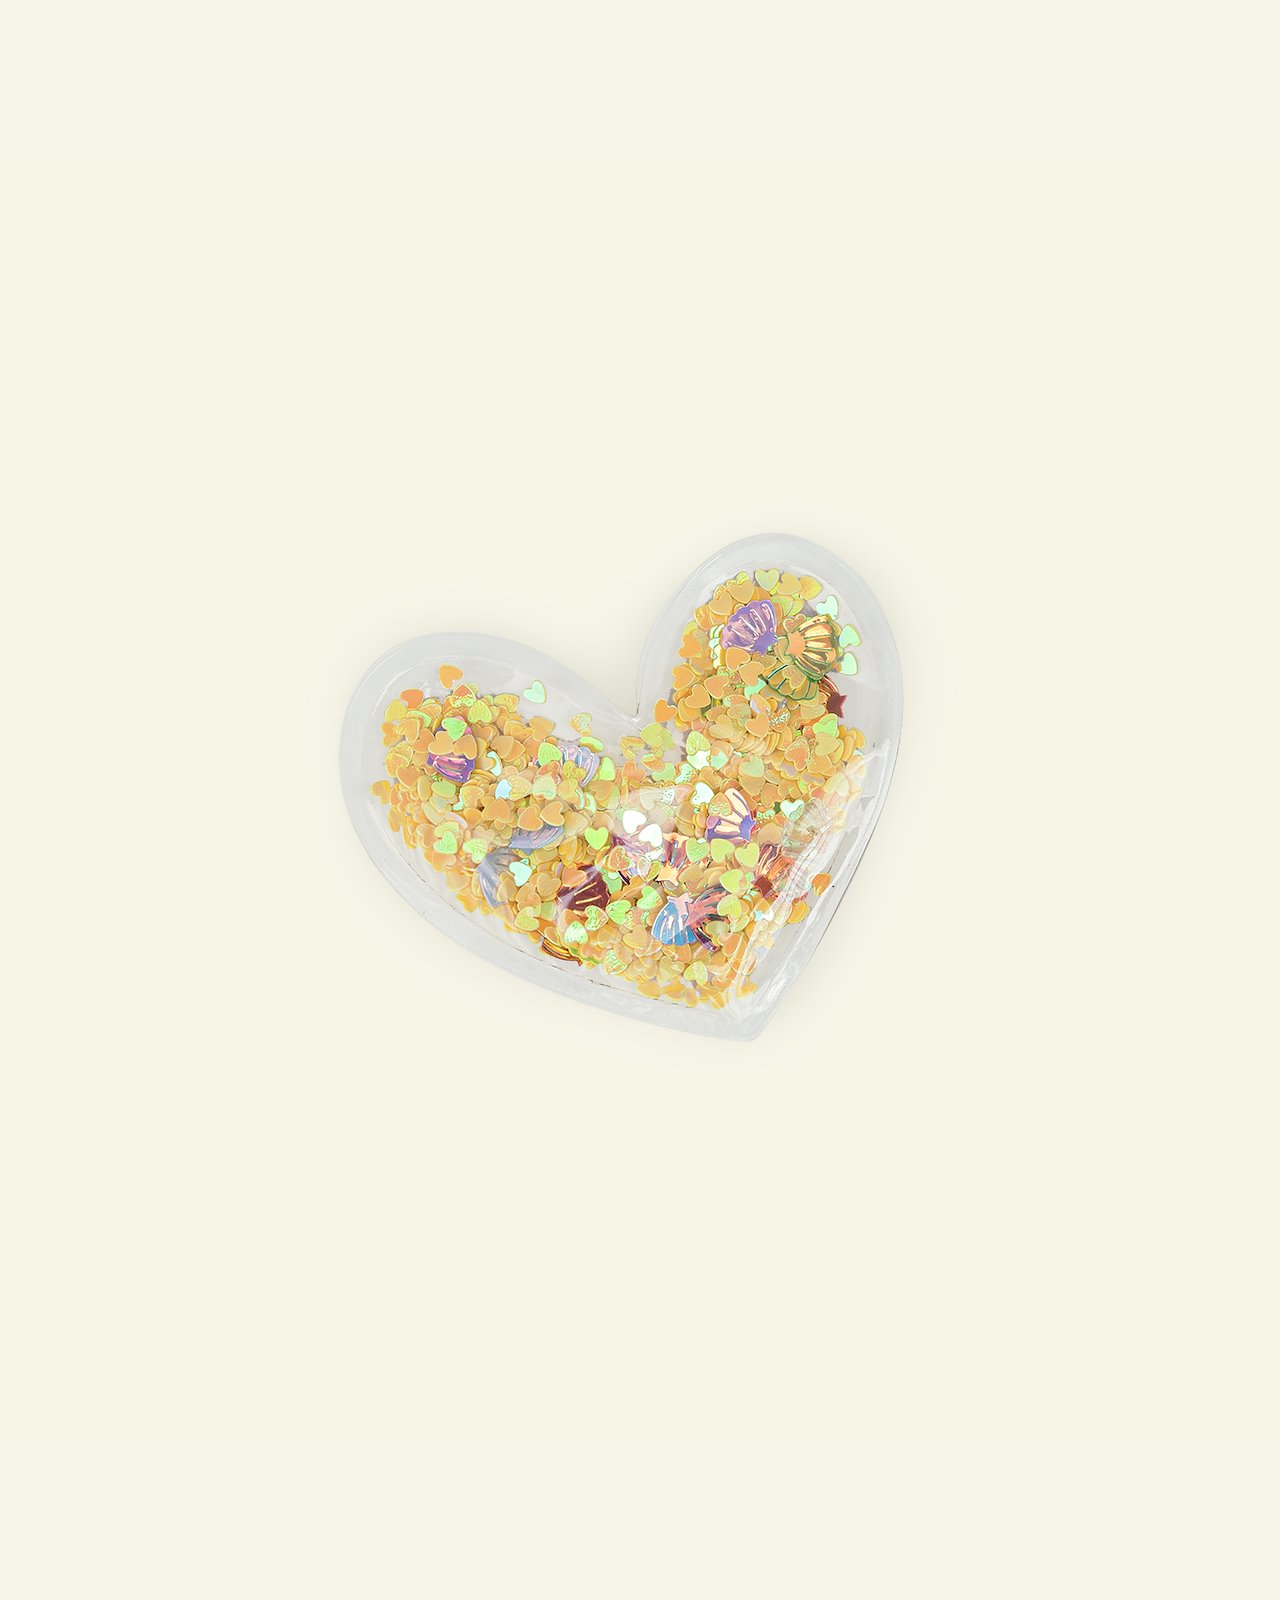 Deco heart 65x60mm yellow mix 1pc 26416_pack